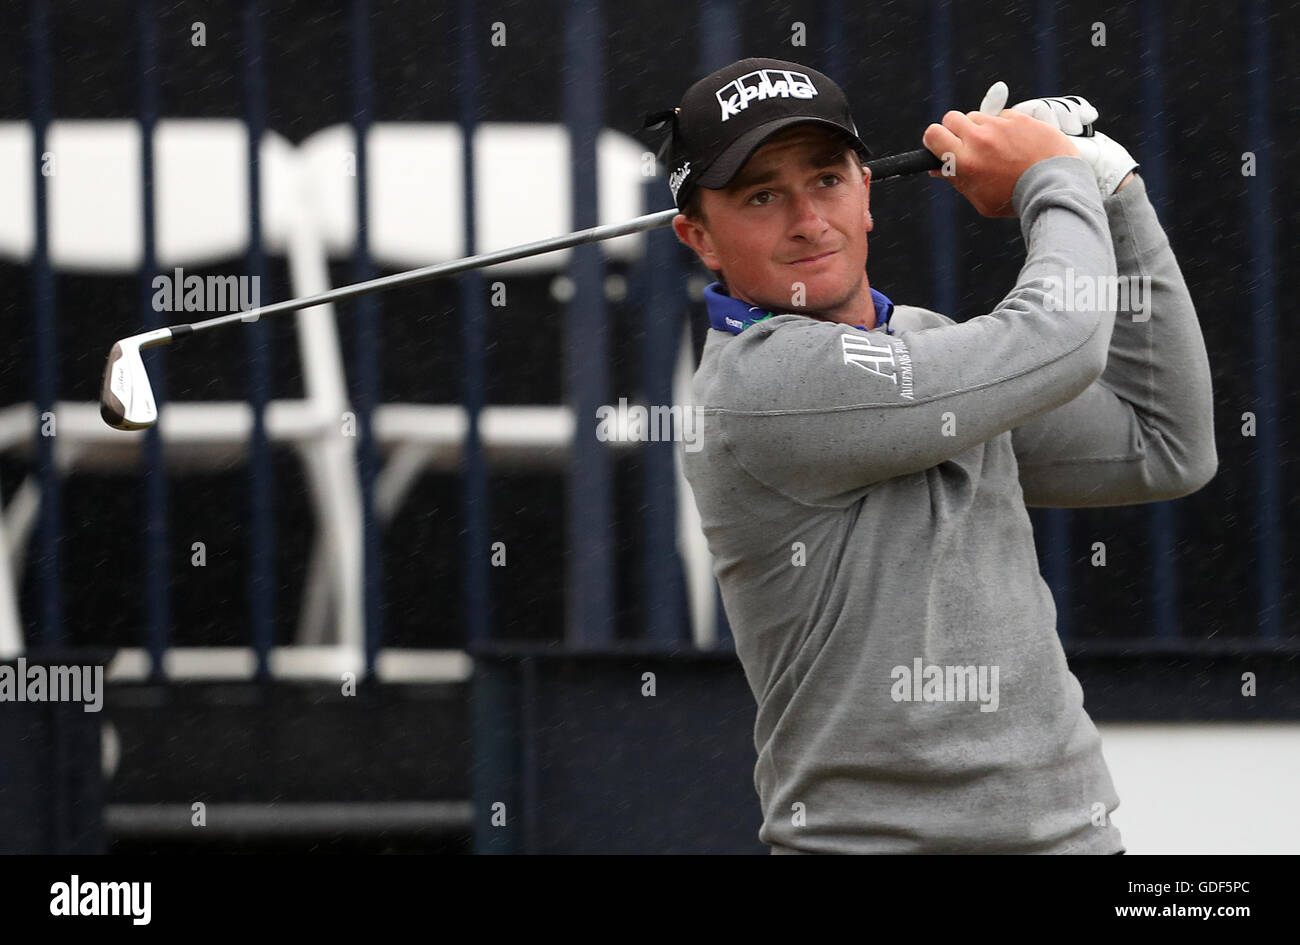 Irlands Paul Dunne tagsüber zwei von The Open Championship 2016 im Royal Troon Golf Club, South Ayrshire. Stockfoto